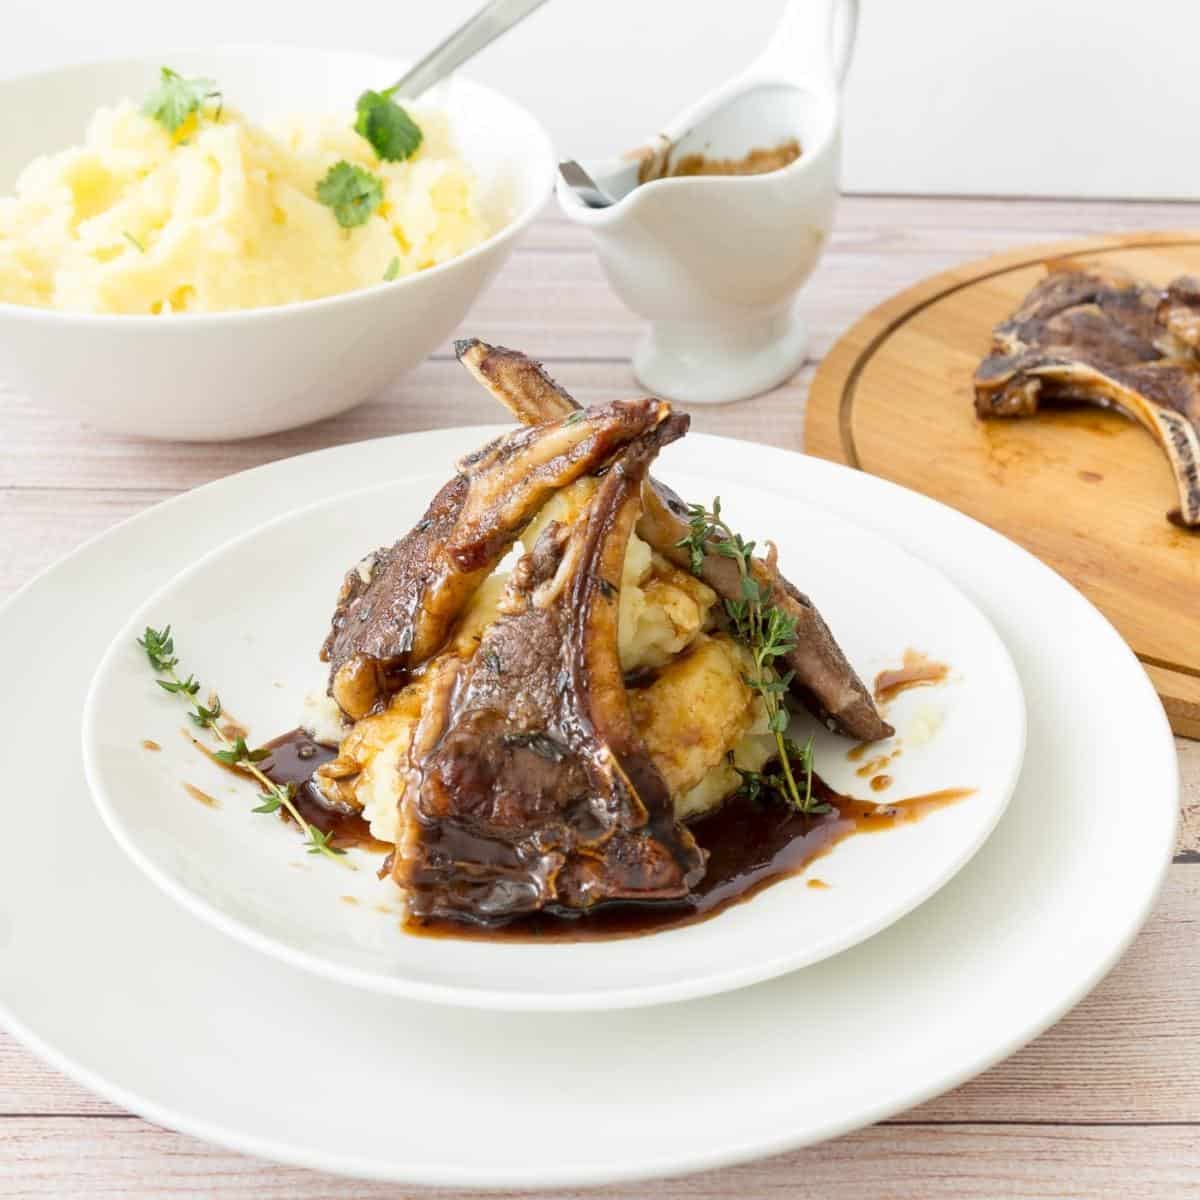 A plate of lamb chops with mashed potatoes.